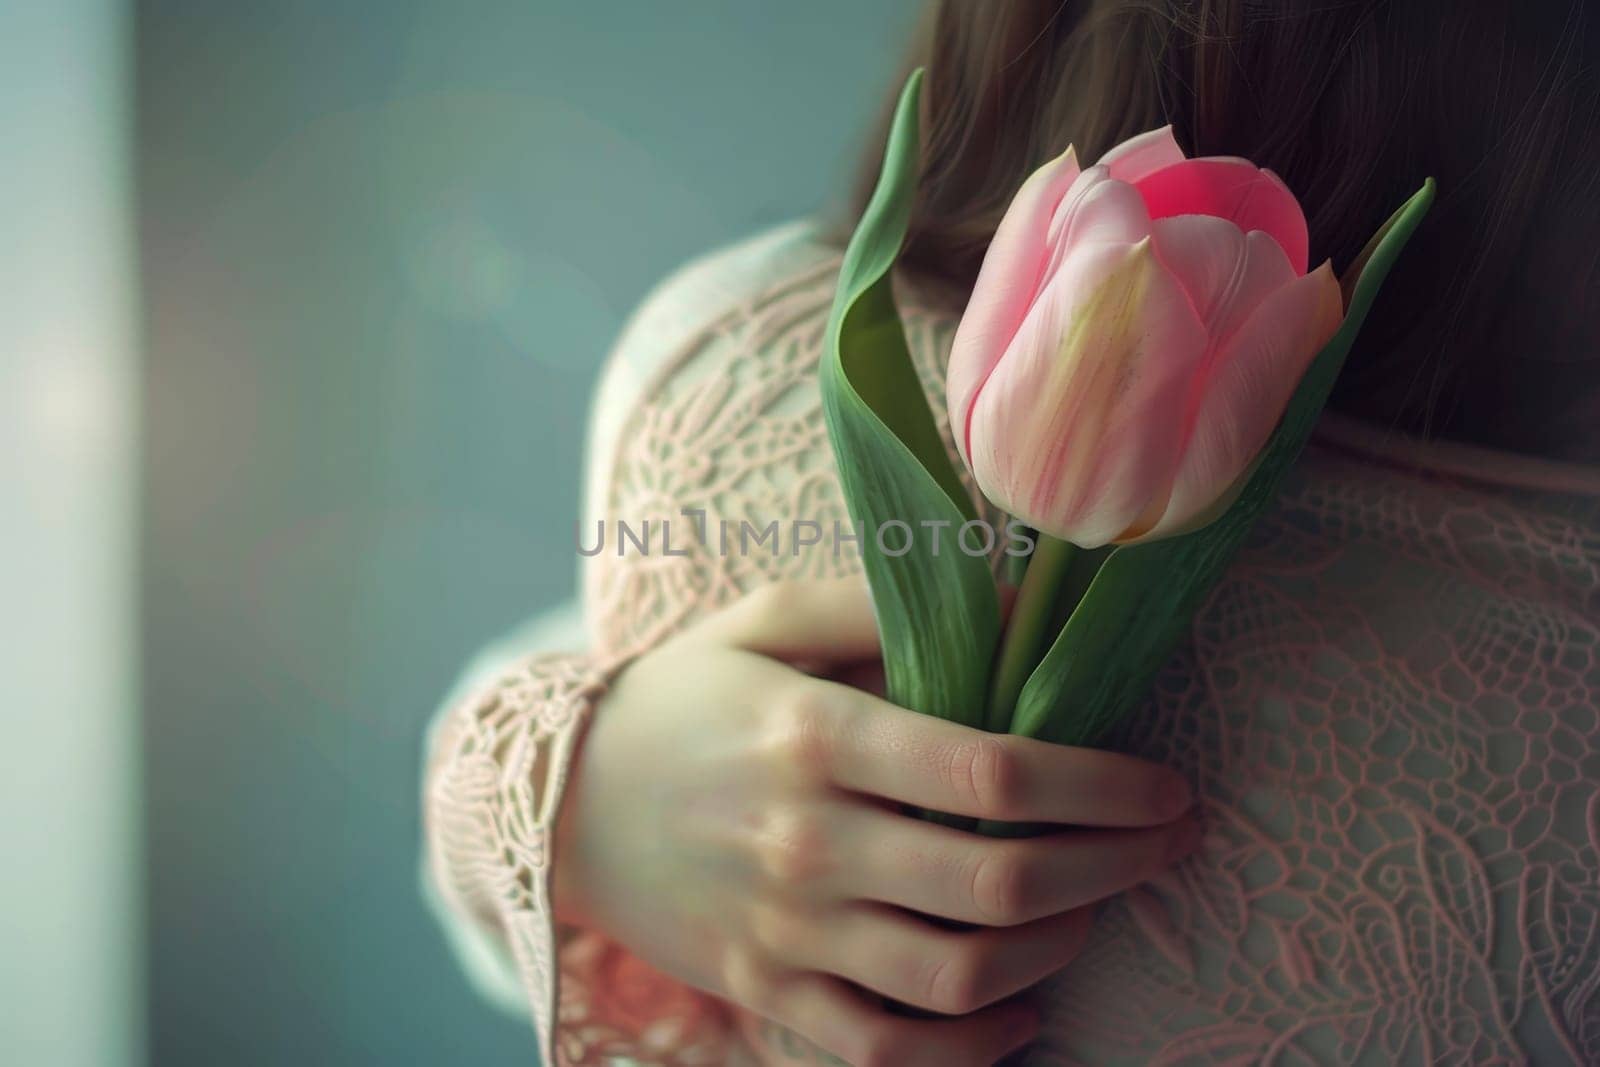 A woman is hugging a child and there are pink flowers in the background.